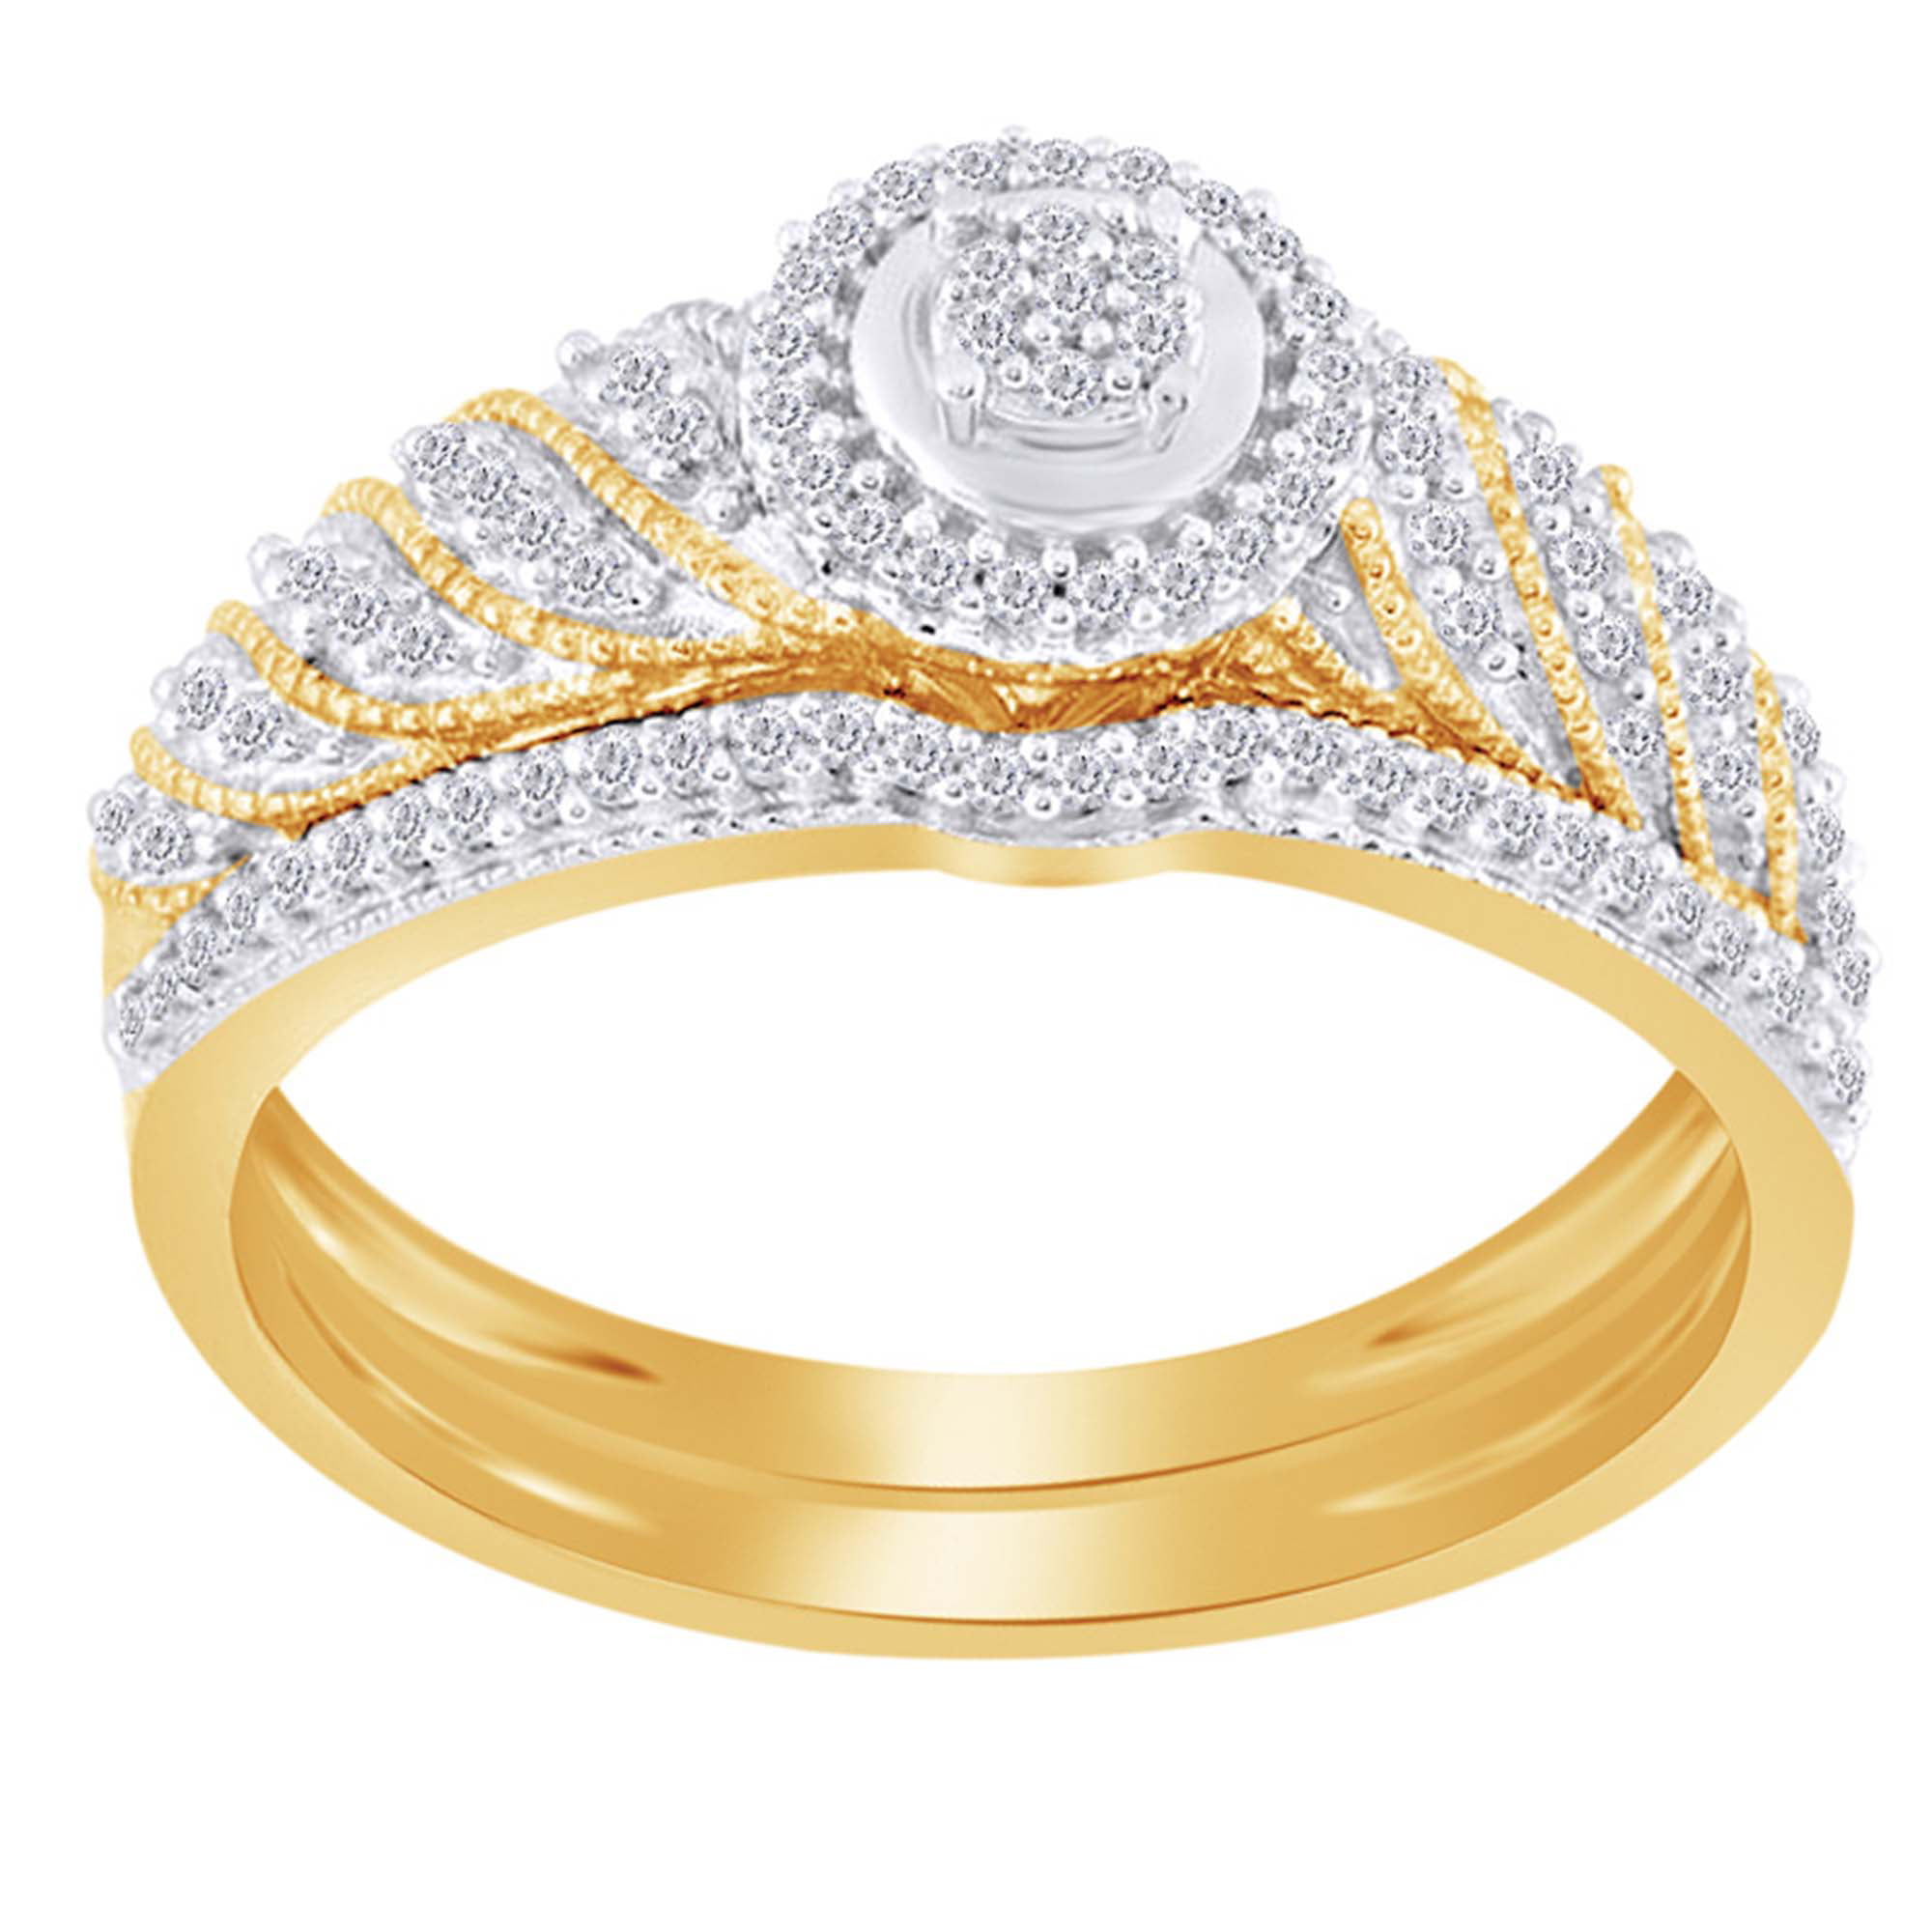 10k Yellow Gold Diamond Curve Band S Ring Fashion Style Round Pave Set Polished Fancy 1/20 ctw